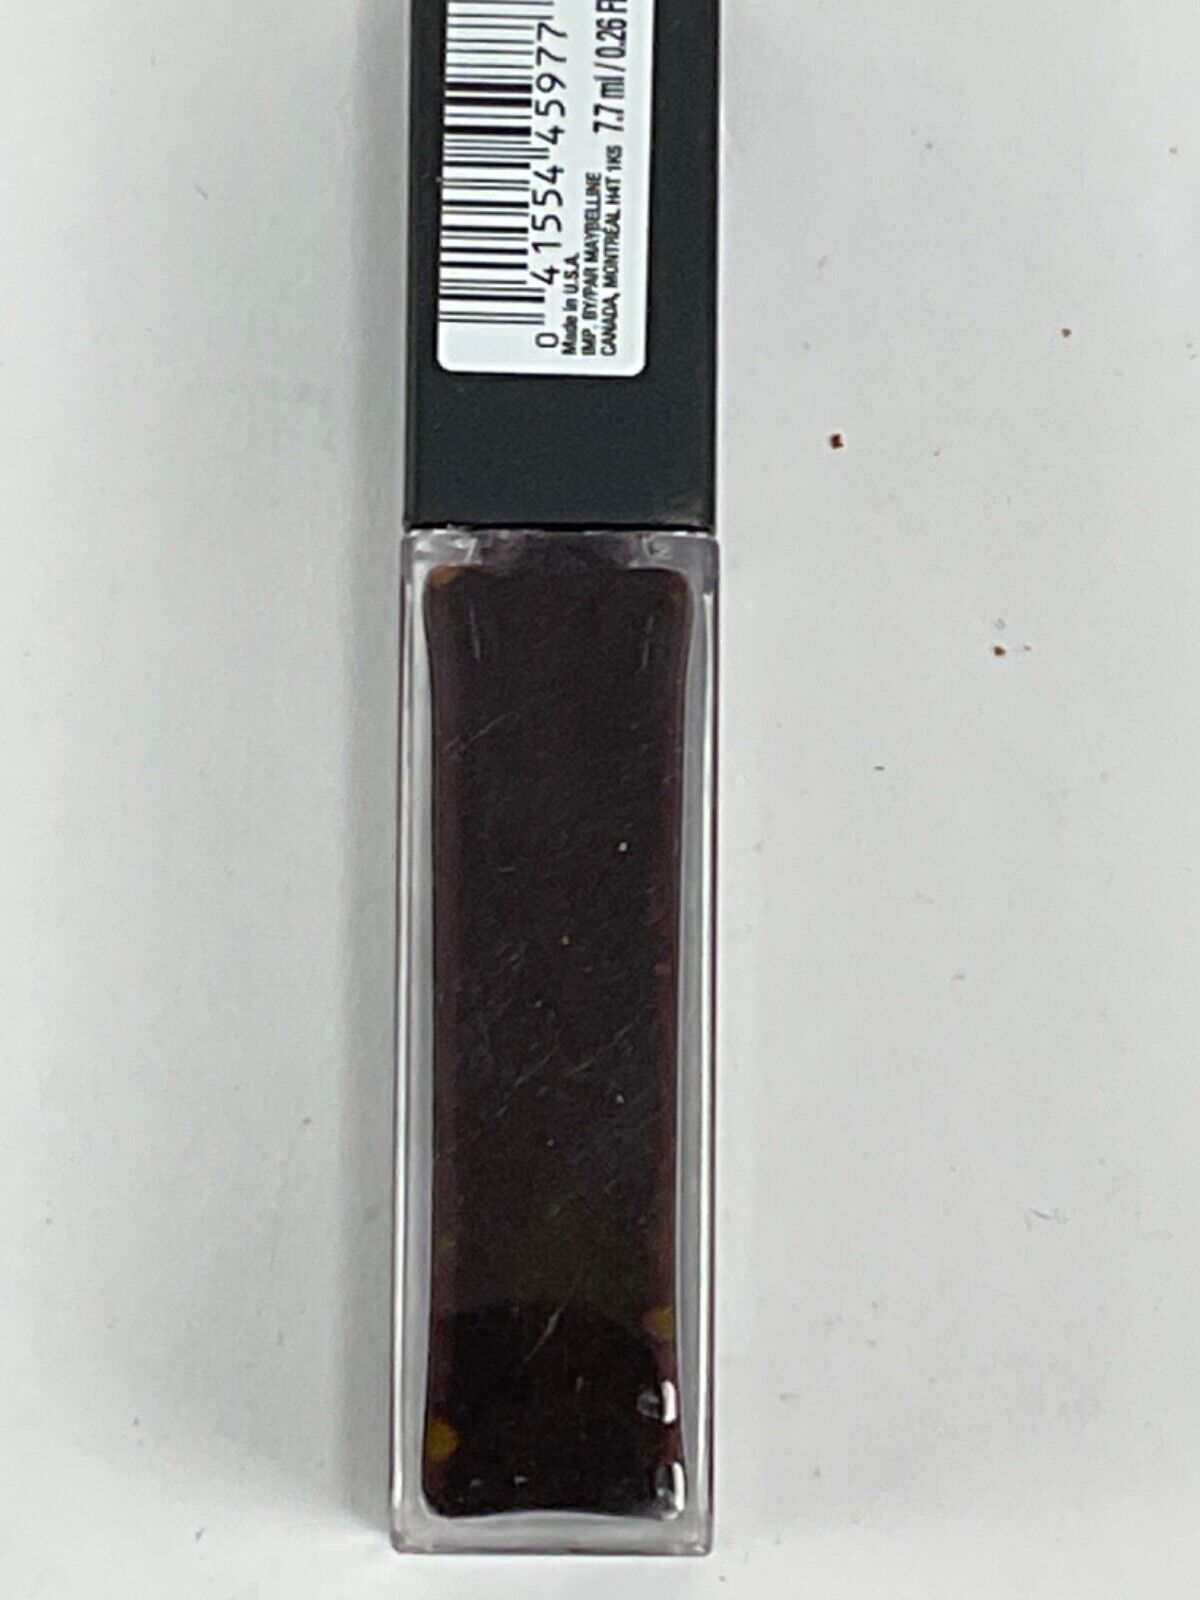 Primary image for Maybelline New York Color Sensational Possessed Plum #50 Lacquer Lip Gloss New